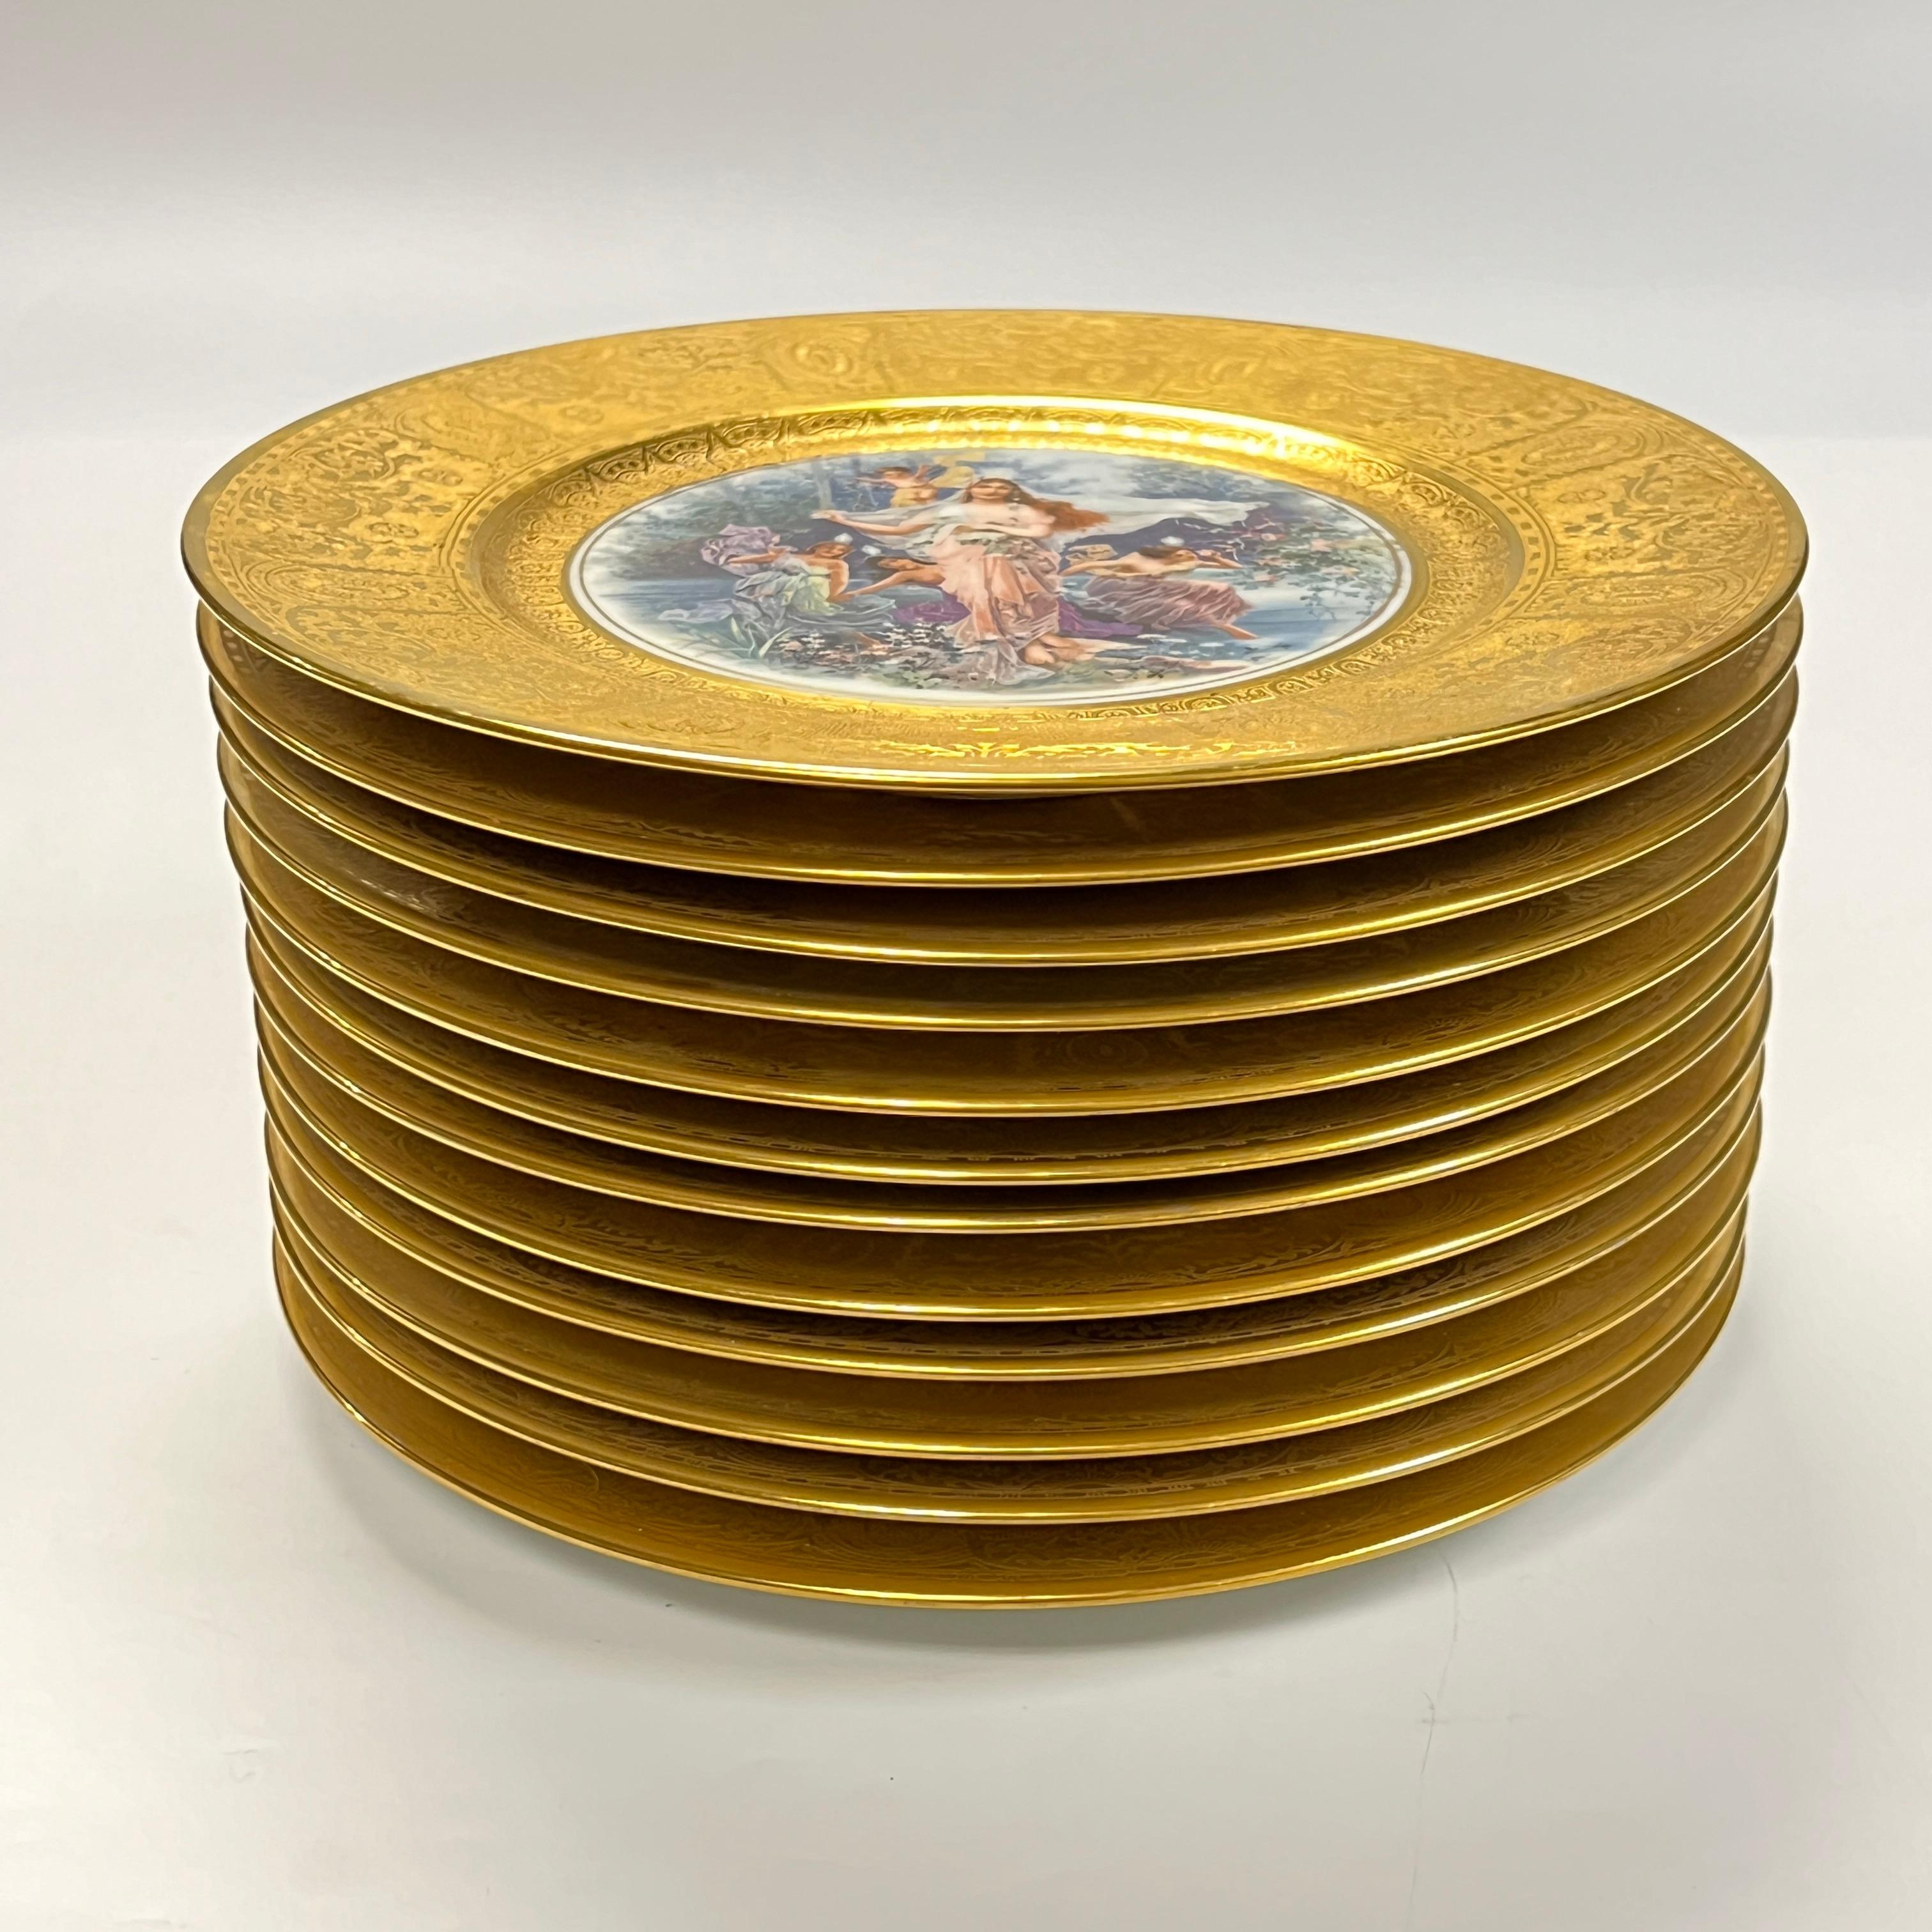 Set of twelve antique cabinet plates with lovely Decal paitings scenes of Roman nymphs and muses frolicking with putti after Angelica kaufman  and with exceptional textured gilt borders.  Each with a stamped mark of the maker on reverse that reads